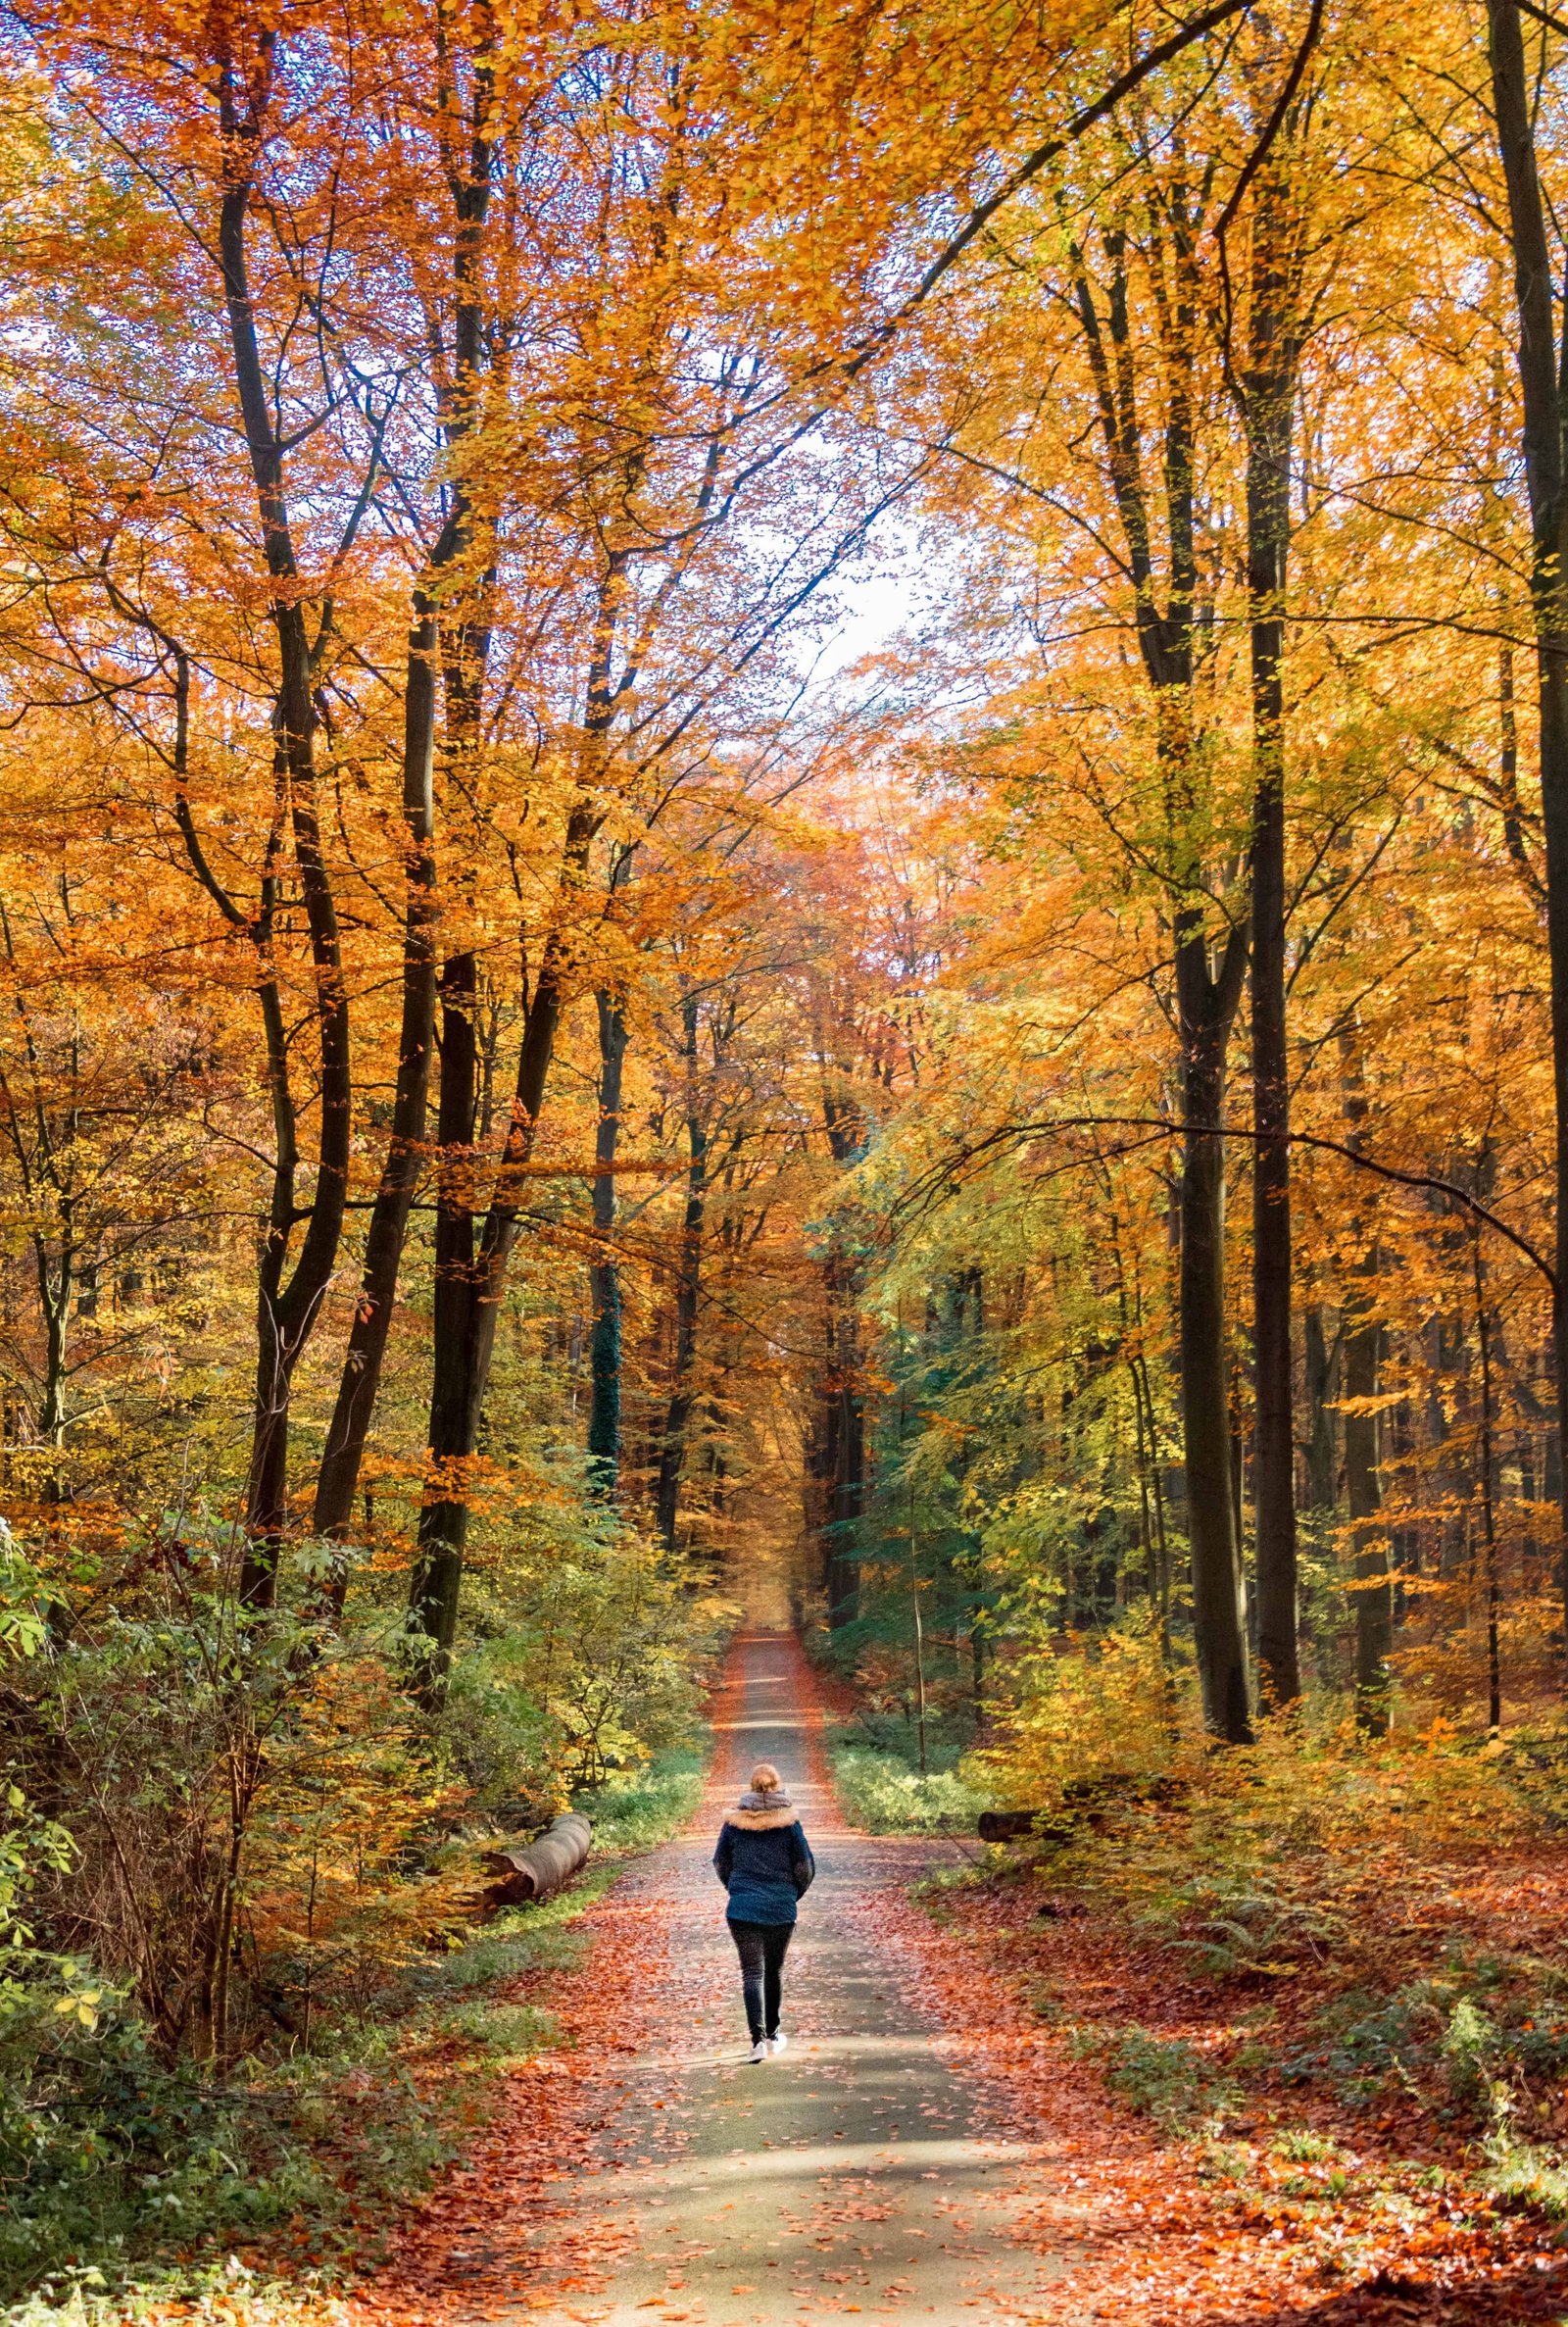 Solo female traveller admiring the fall leaves and the colours of the trees in a national park.